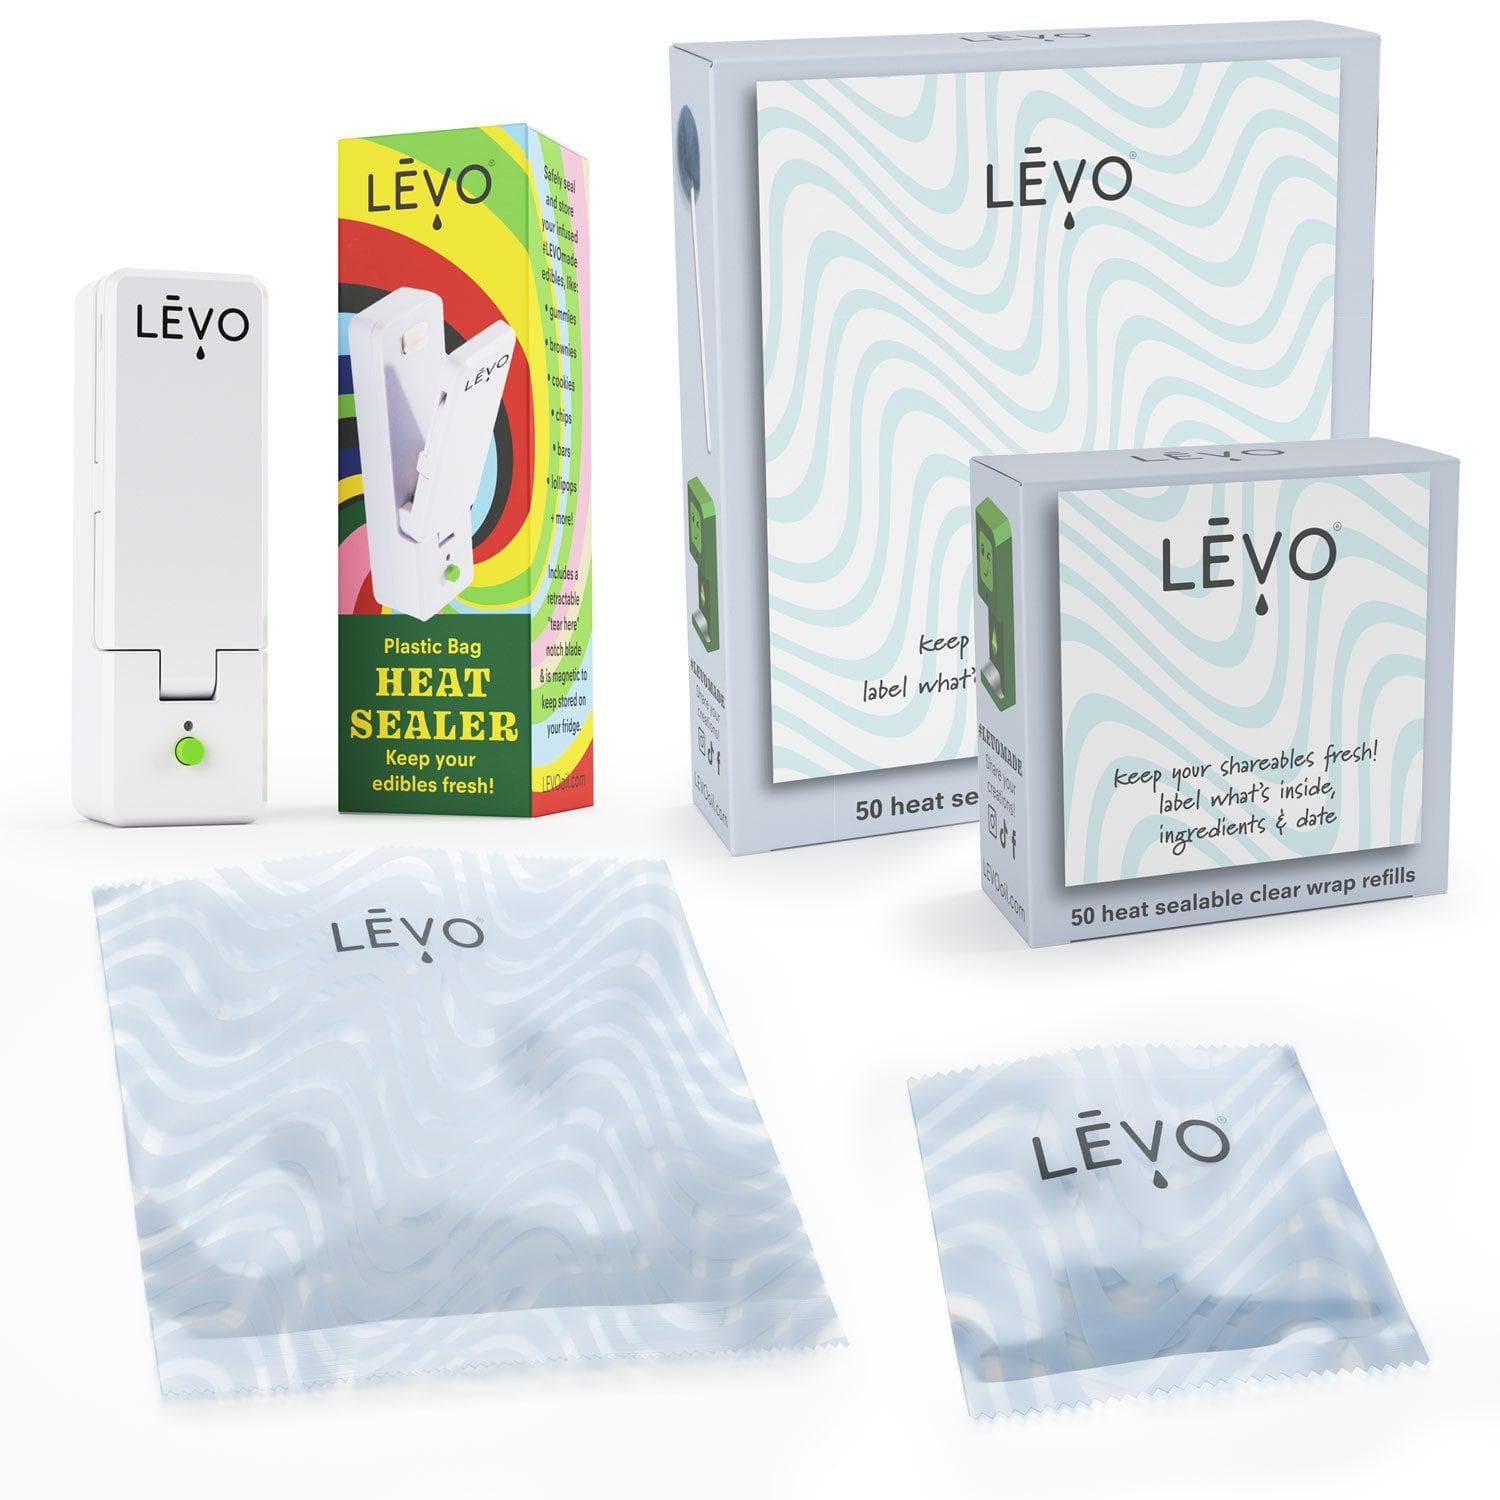 LEVO heat sealer kit, because sharing is caring! Use the sharing is caring kit to share #levomade edibles with your friends.